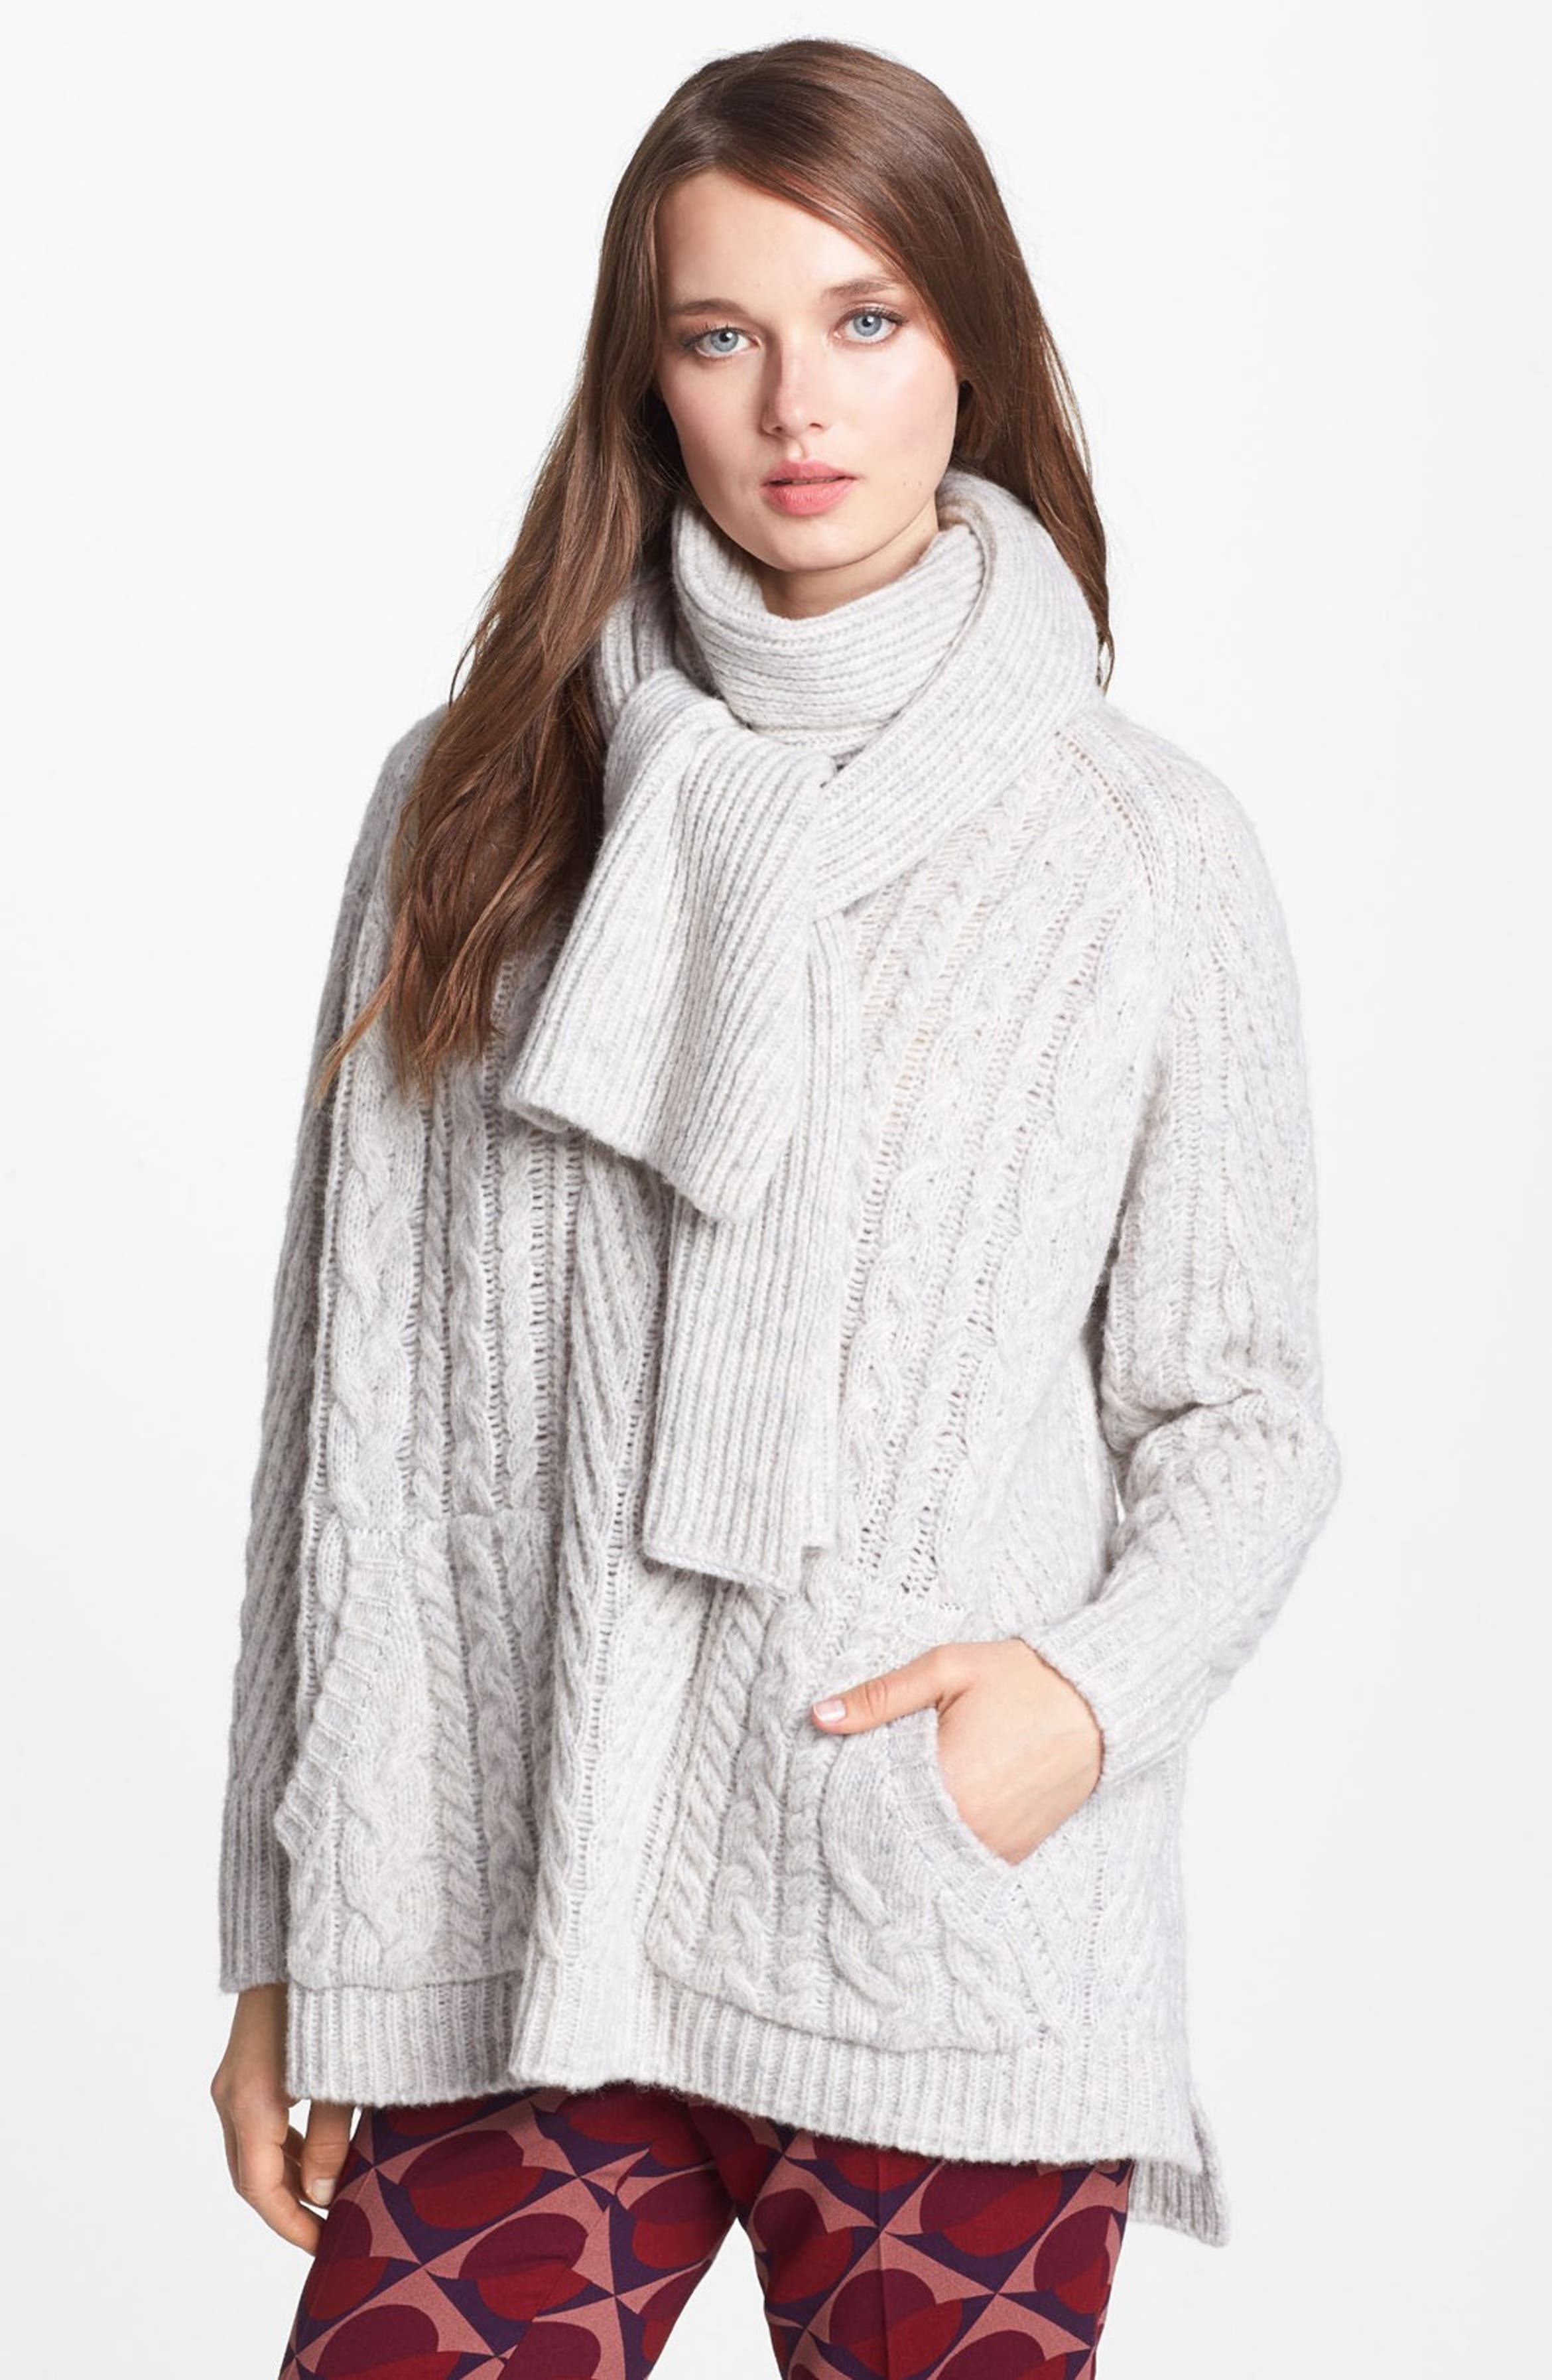 MARC BY MARC JACOBS 'Connolly' Crew Neck Sweater with Scarf | Nordstrom